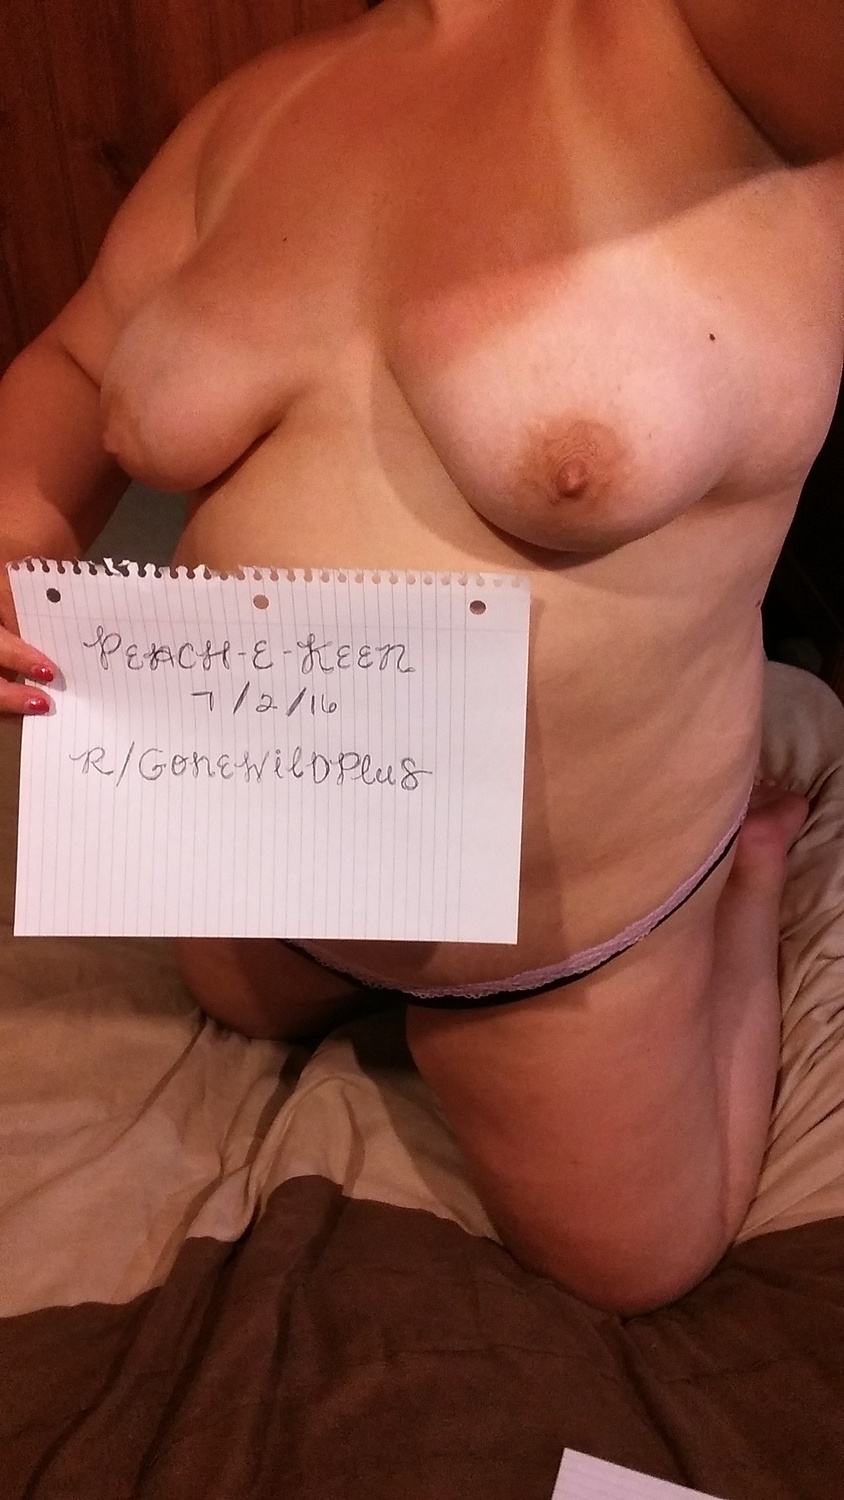 Was hoping you fellas could verify me ;) [F/22/BBW]